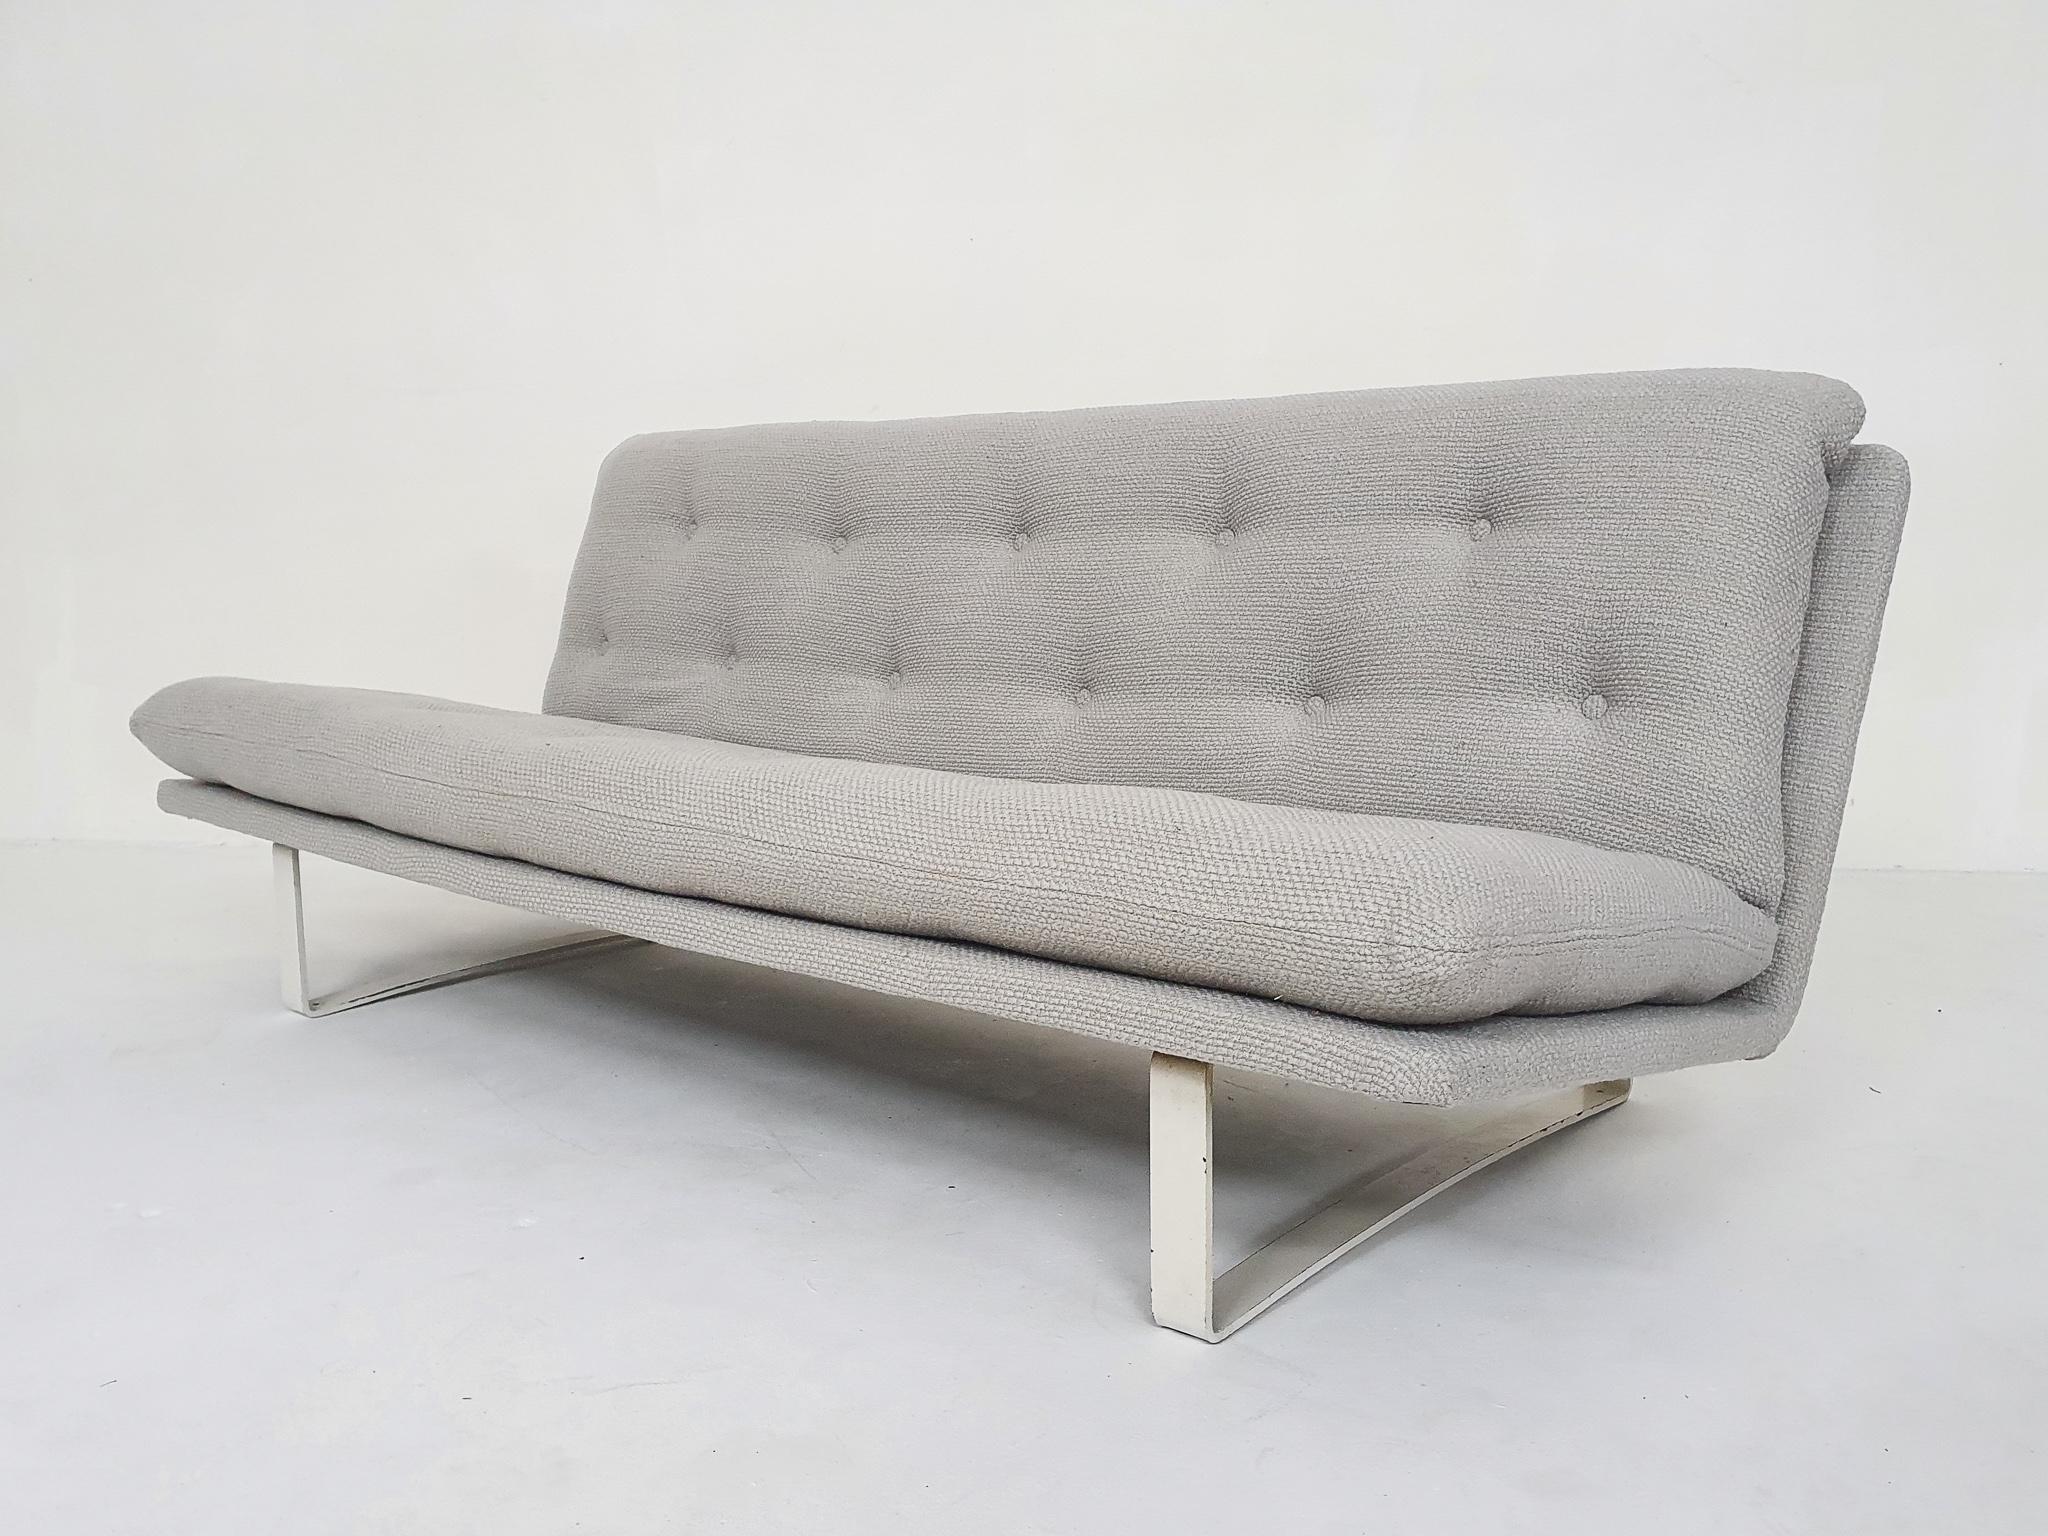 Design sofa by Kho Liang Ie for Artifort, The Netherlands 1968.
The white frame has some traces of use, but can be repainted if desired.
We upholstered the sofa in a light grey wool fabric (100% natural)

Kho Liang Le
Kho Liang Ie (1927-1975) was a